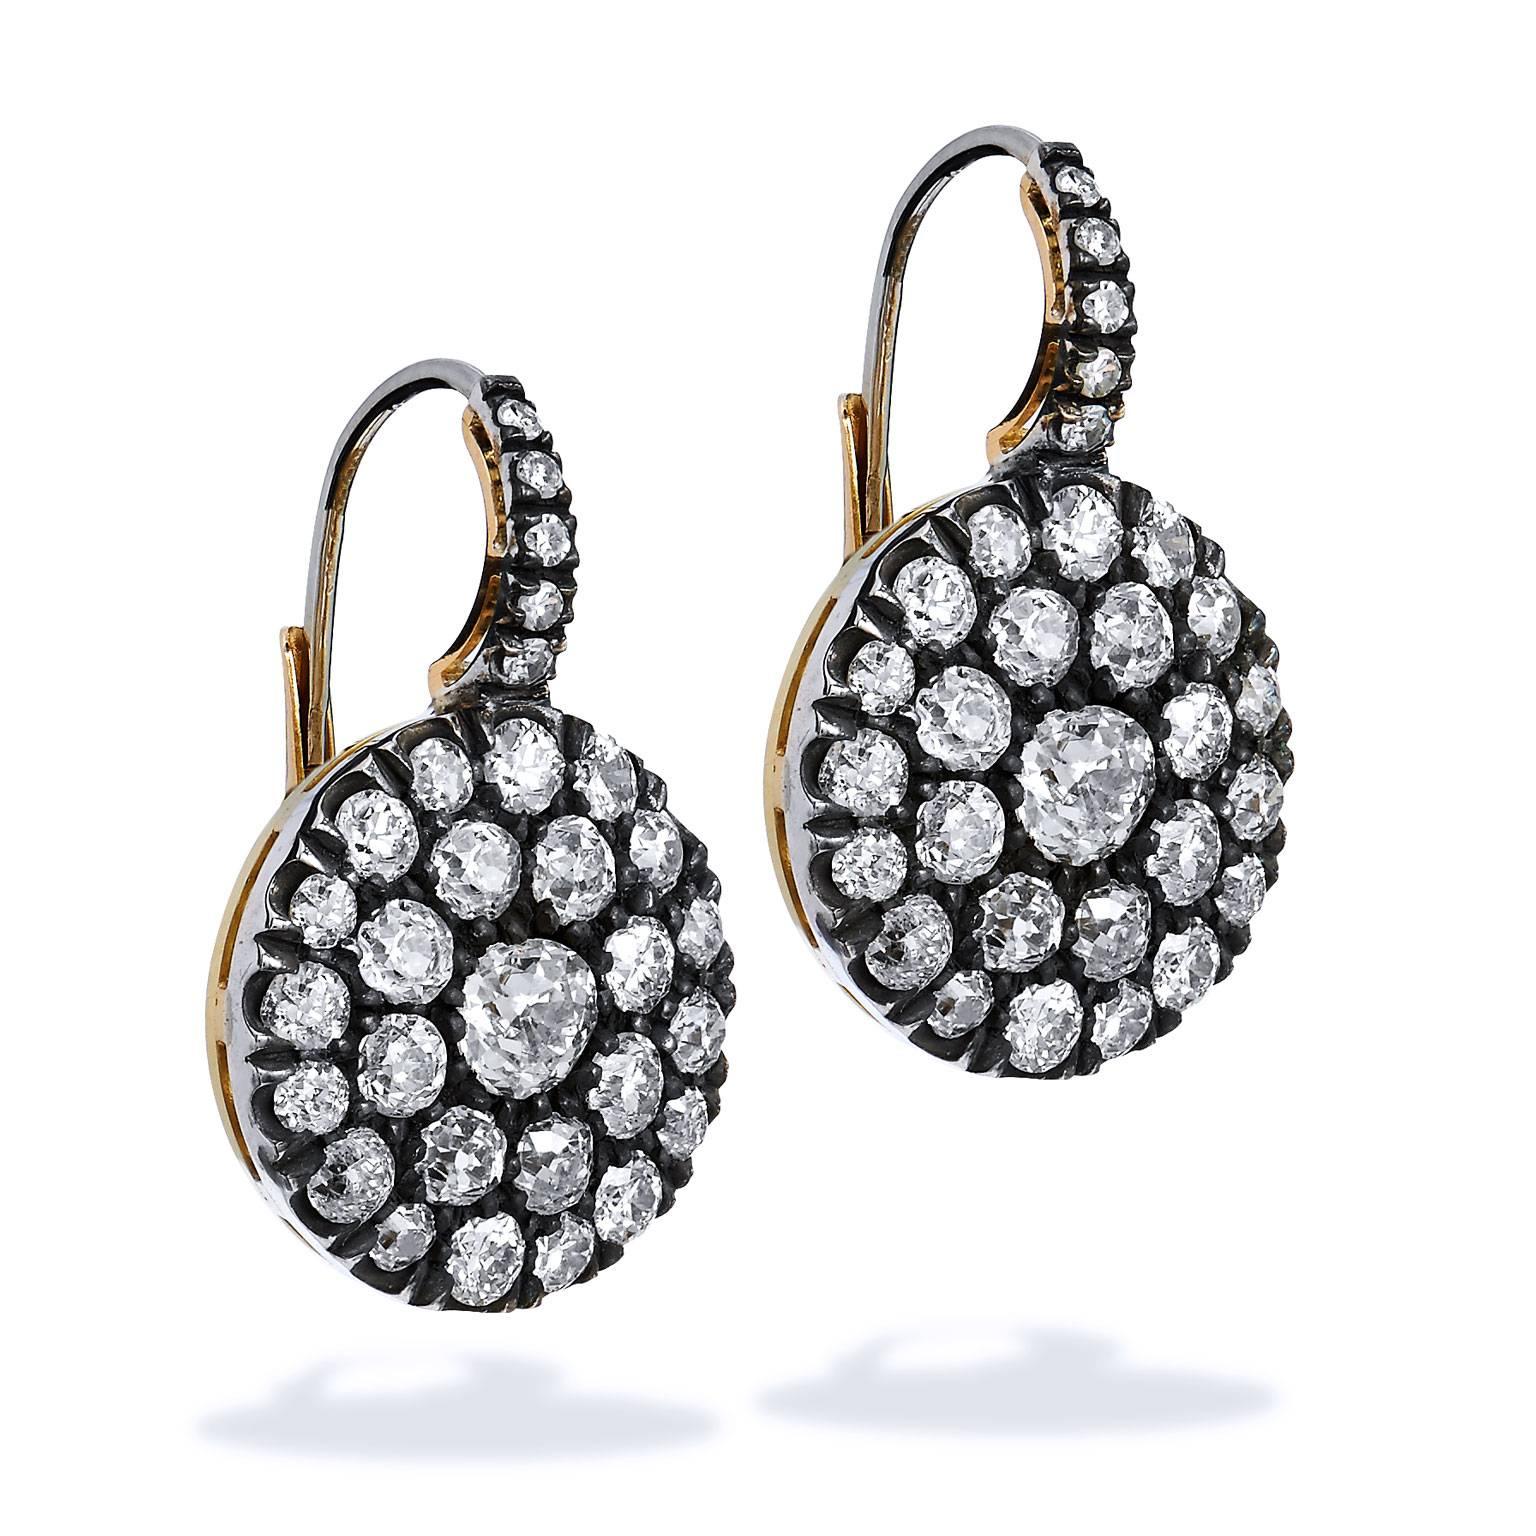 A pair of earrings whose charm and uniqueness glimmers with subtlety. An H and H original handmade design, these earrings feature sixty pieces of antique diamonds- resulting in a total weight of 4.61 carats of Old European, Old Mine and single cut